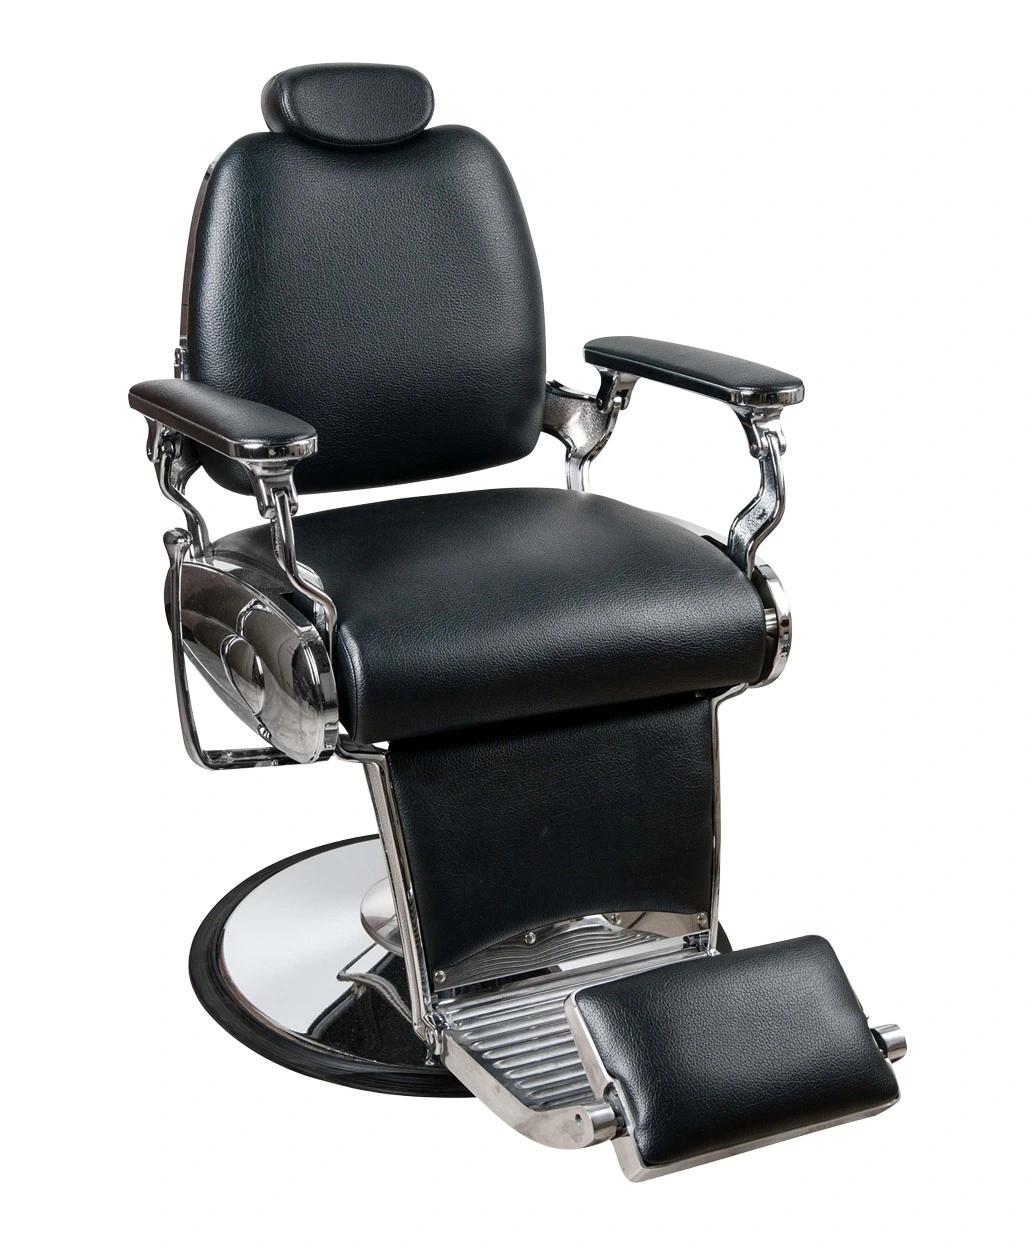 Chinese Red Beauty Hair Salon Barber Shop Chair